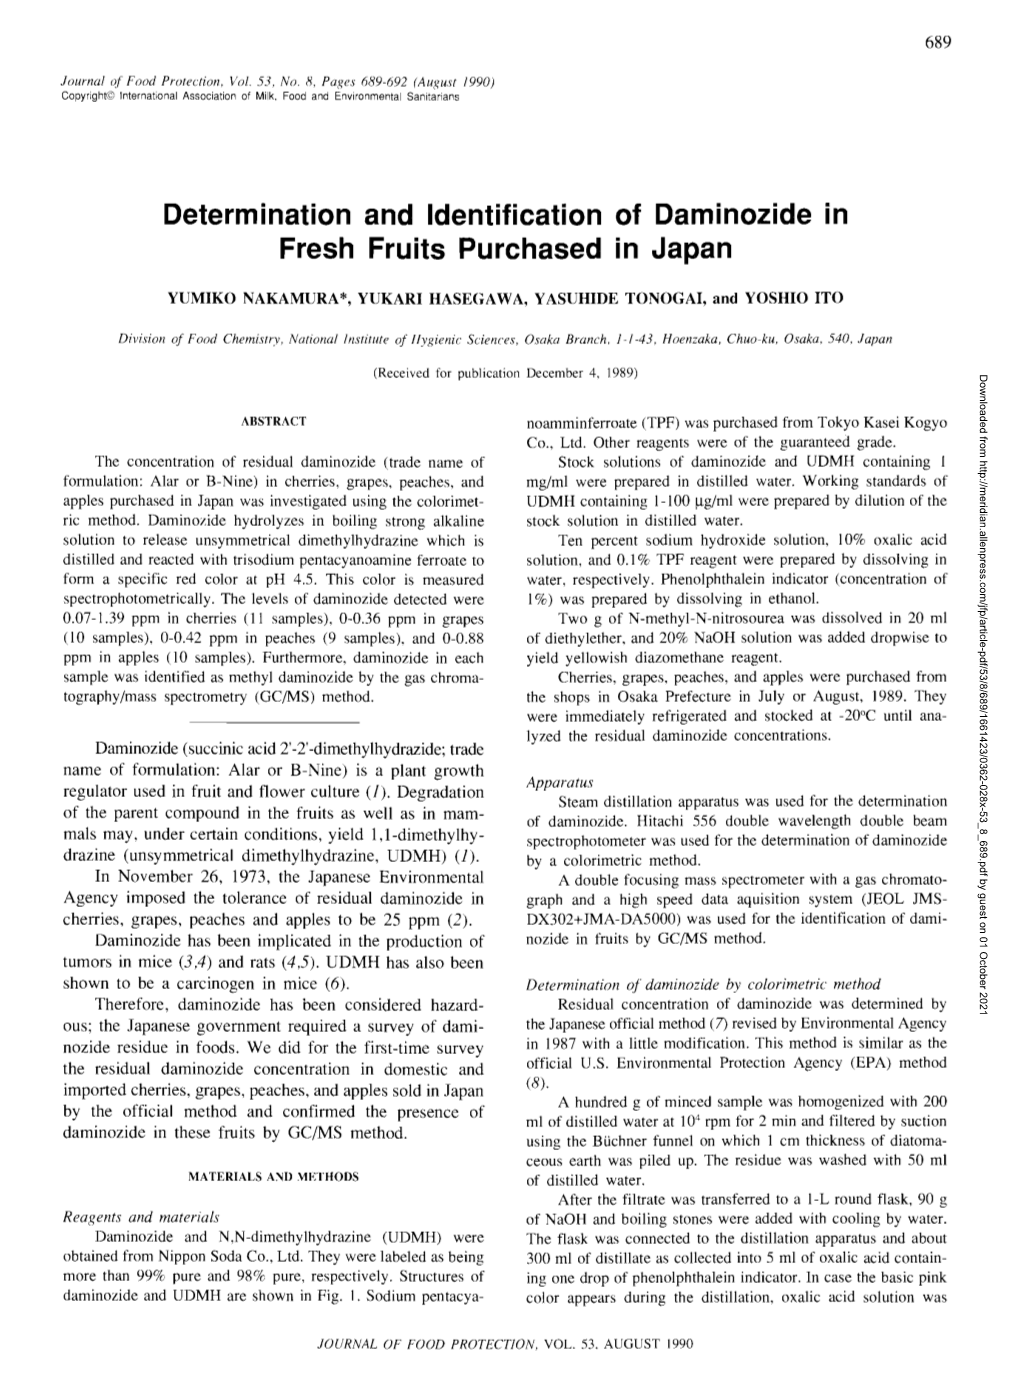 Determination and Identification of Daminozide in Fresh Fruits Purchased in Japan